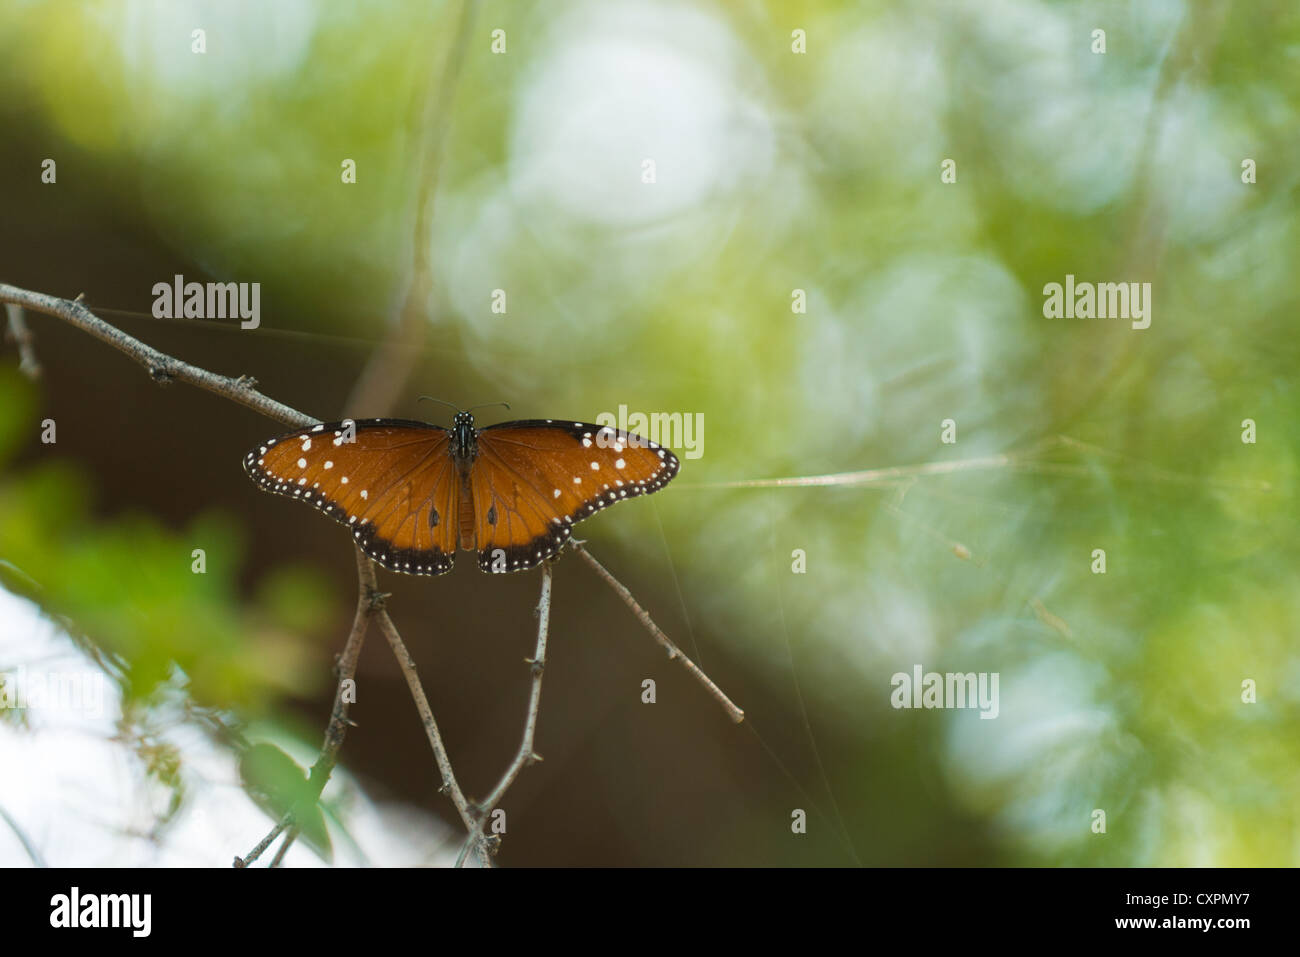 Butterfly on twig, Big Bend National Park, Texas. Stock Photo